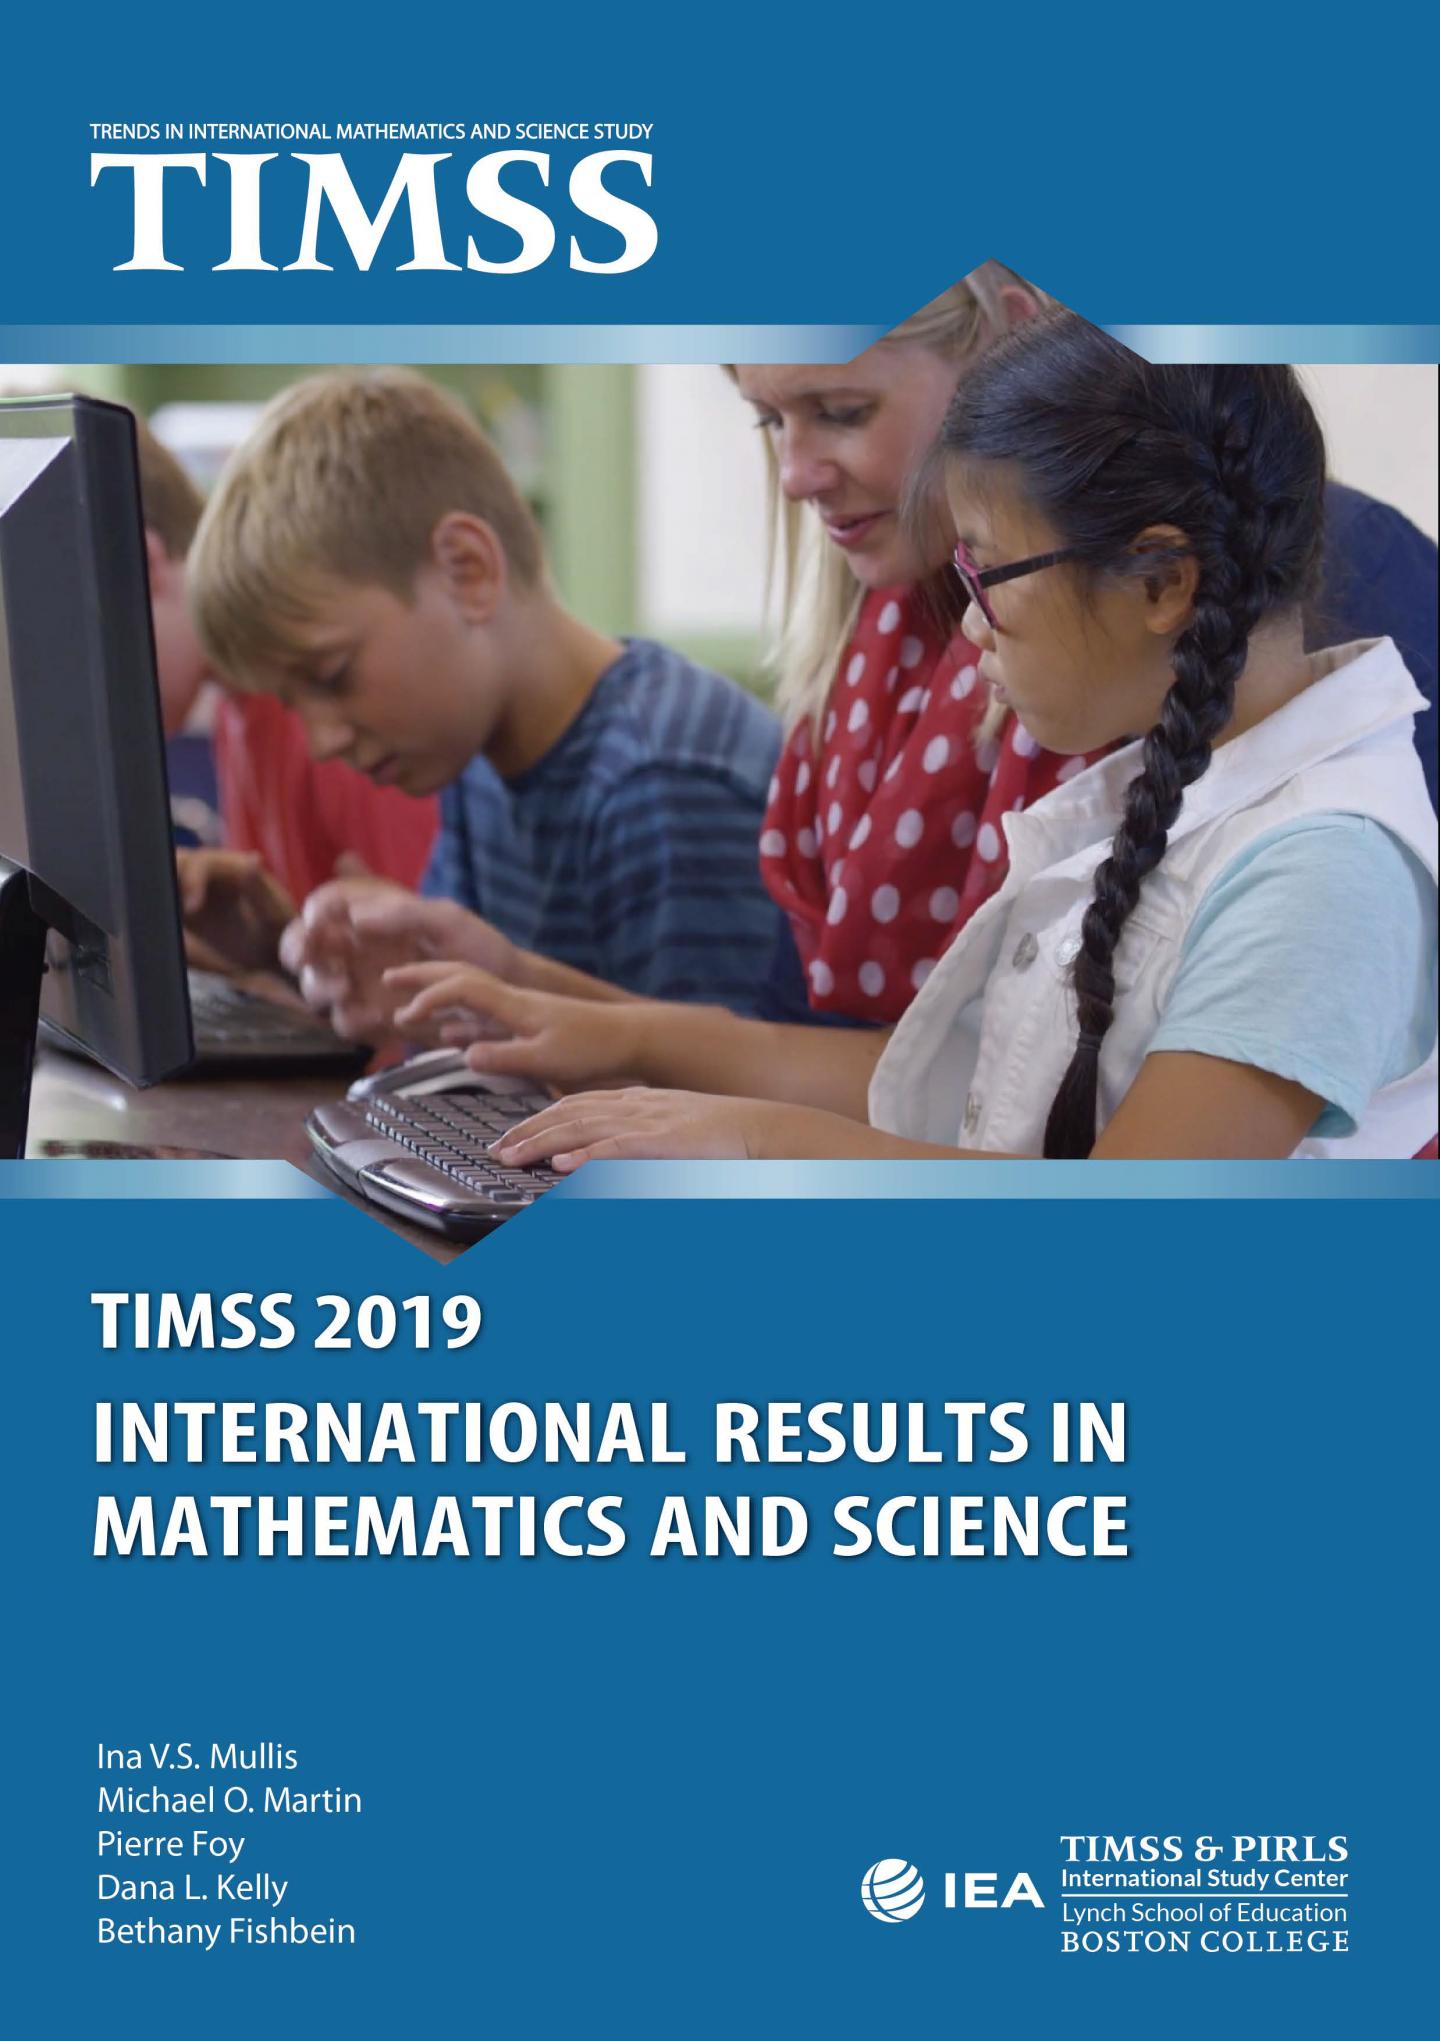 TIMSS 2019 Results Released